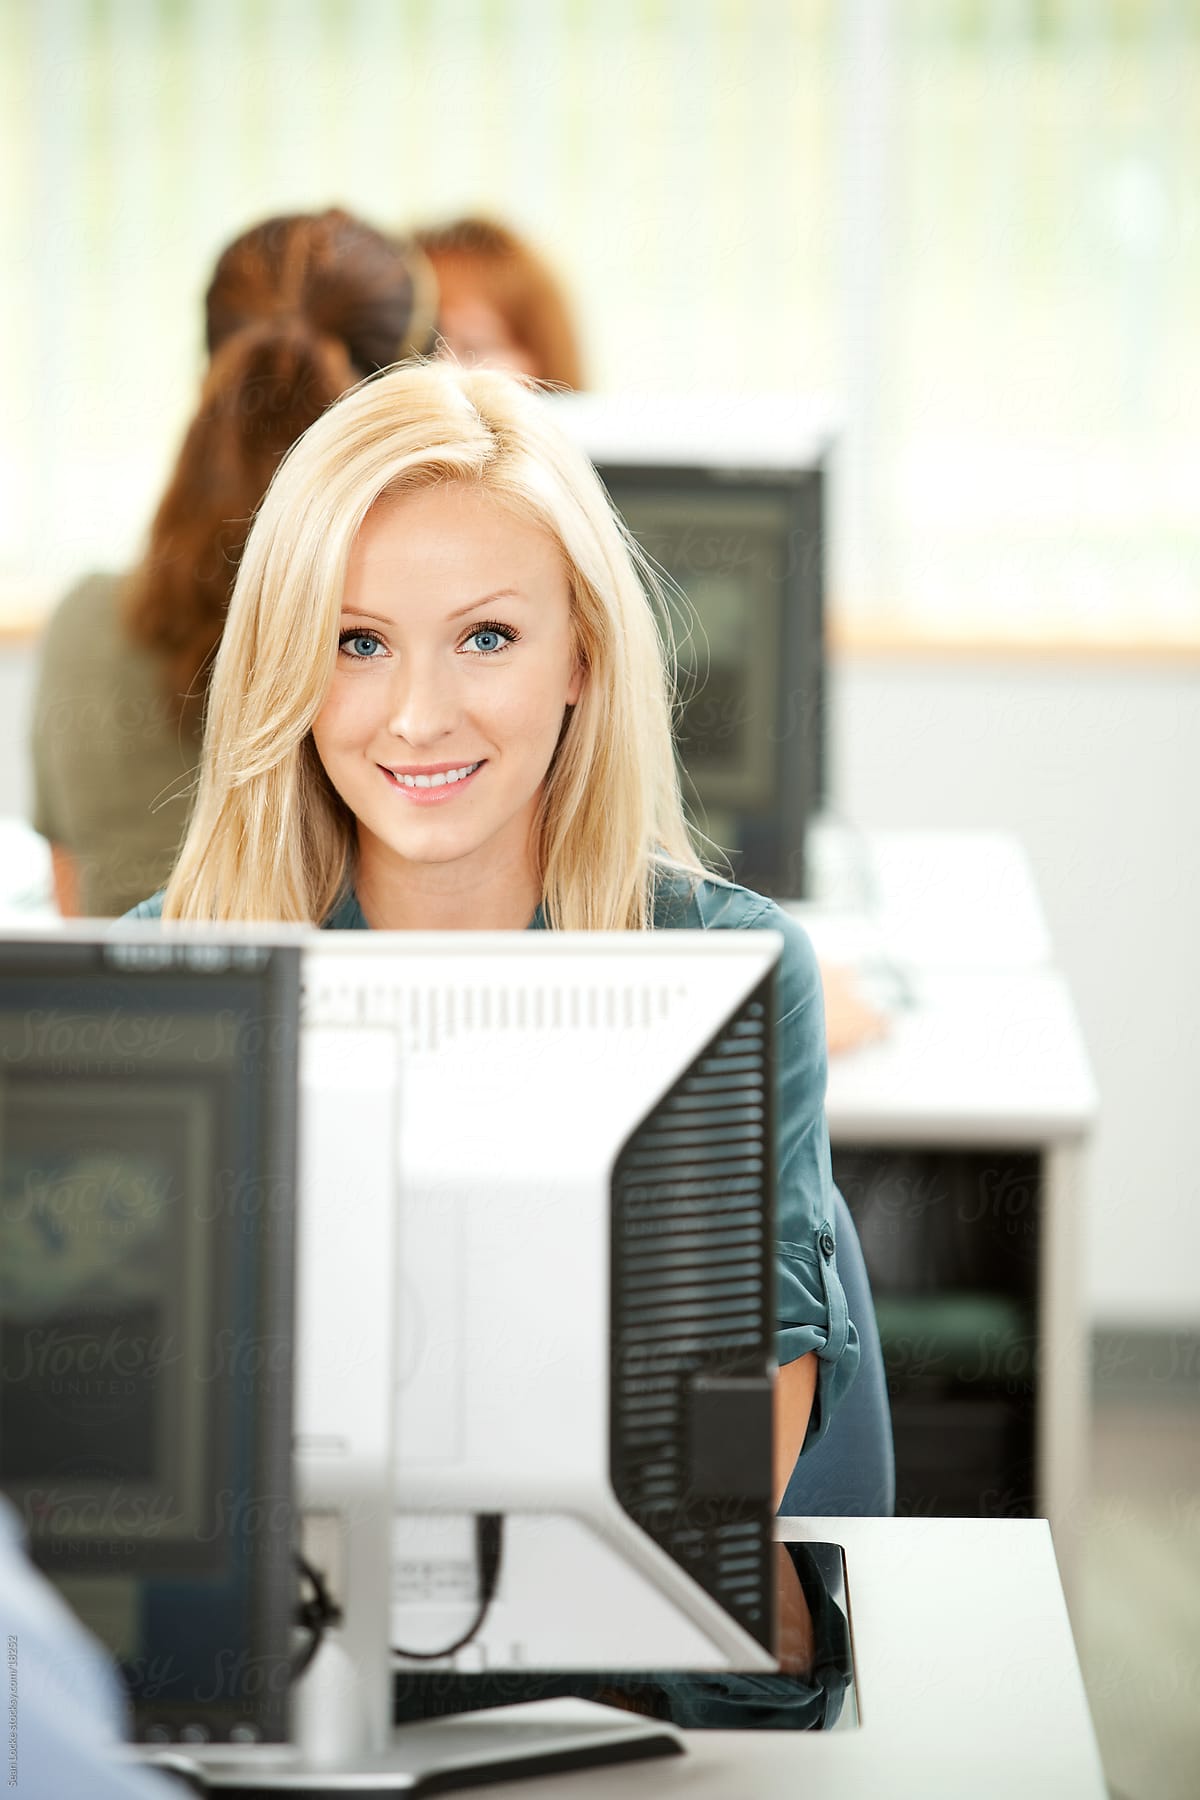 Computer Class: Woman Happy to Be Learning New Skill